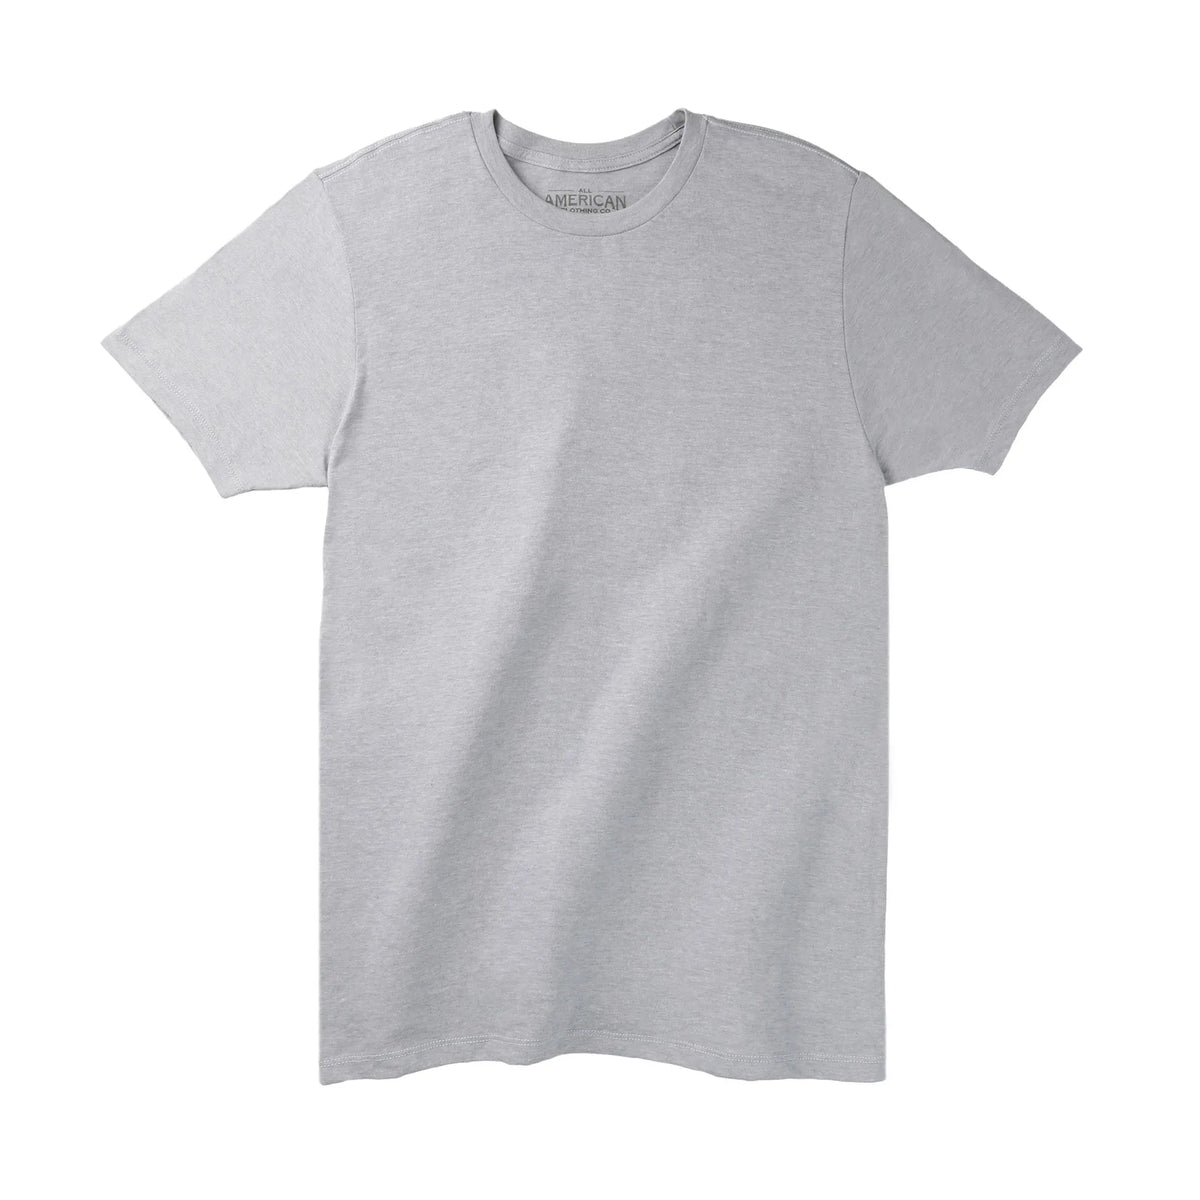 Blank T-Shirts - All American Clothing Co